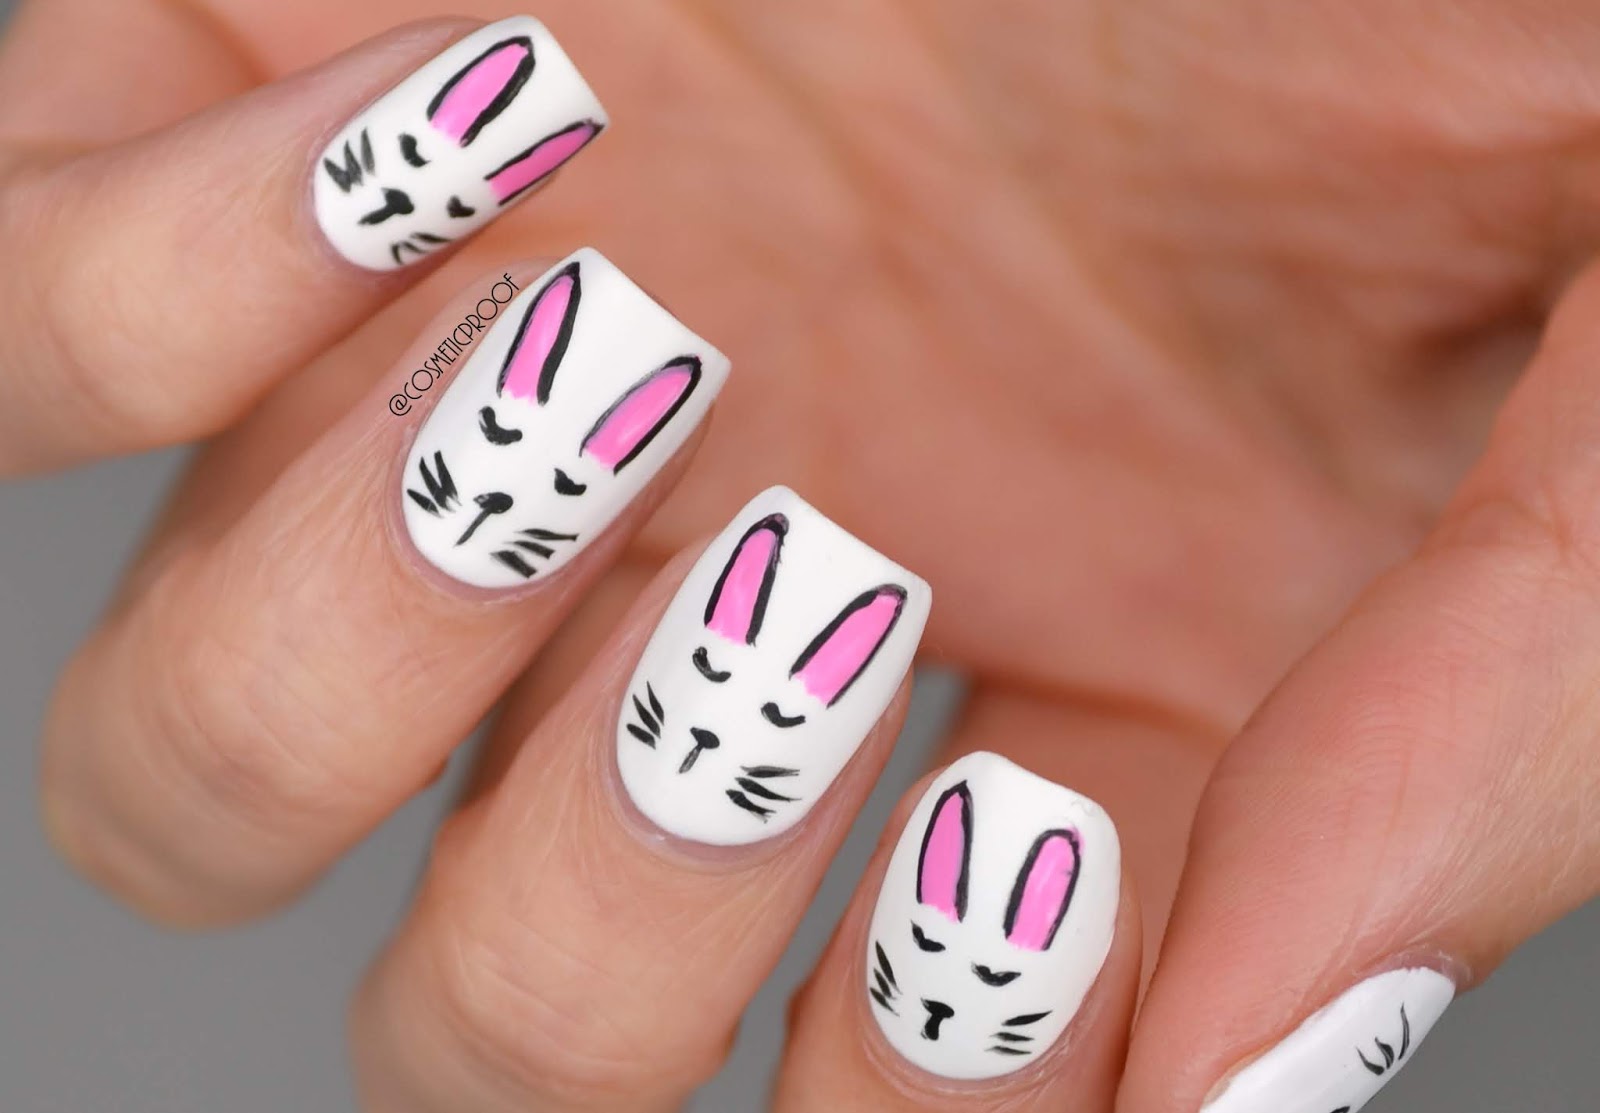 3. Easter Bunny Butt Nails - wide 4